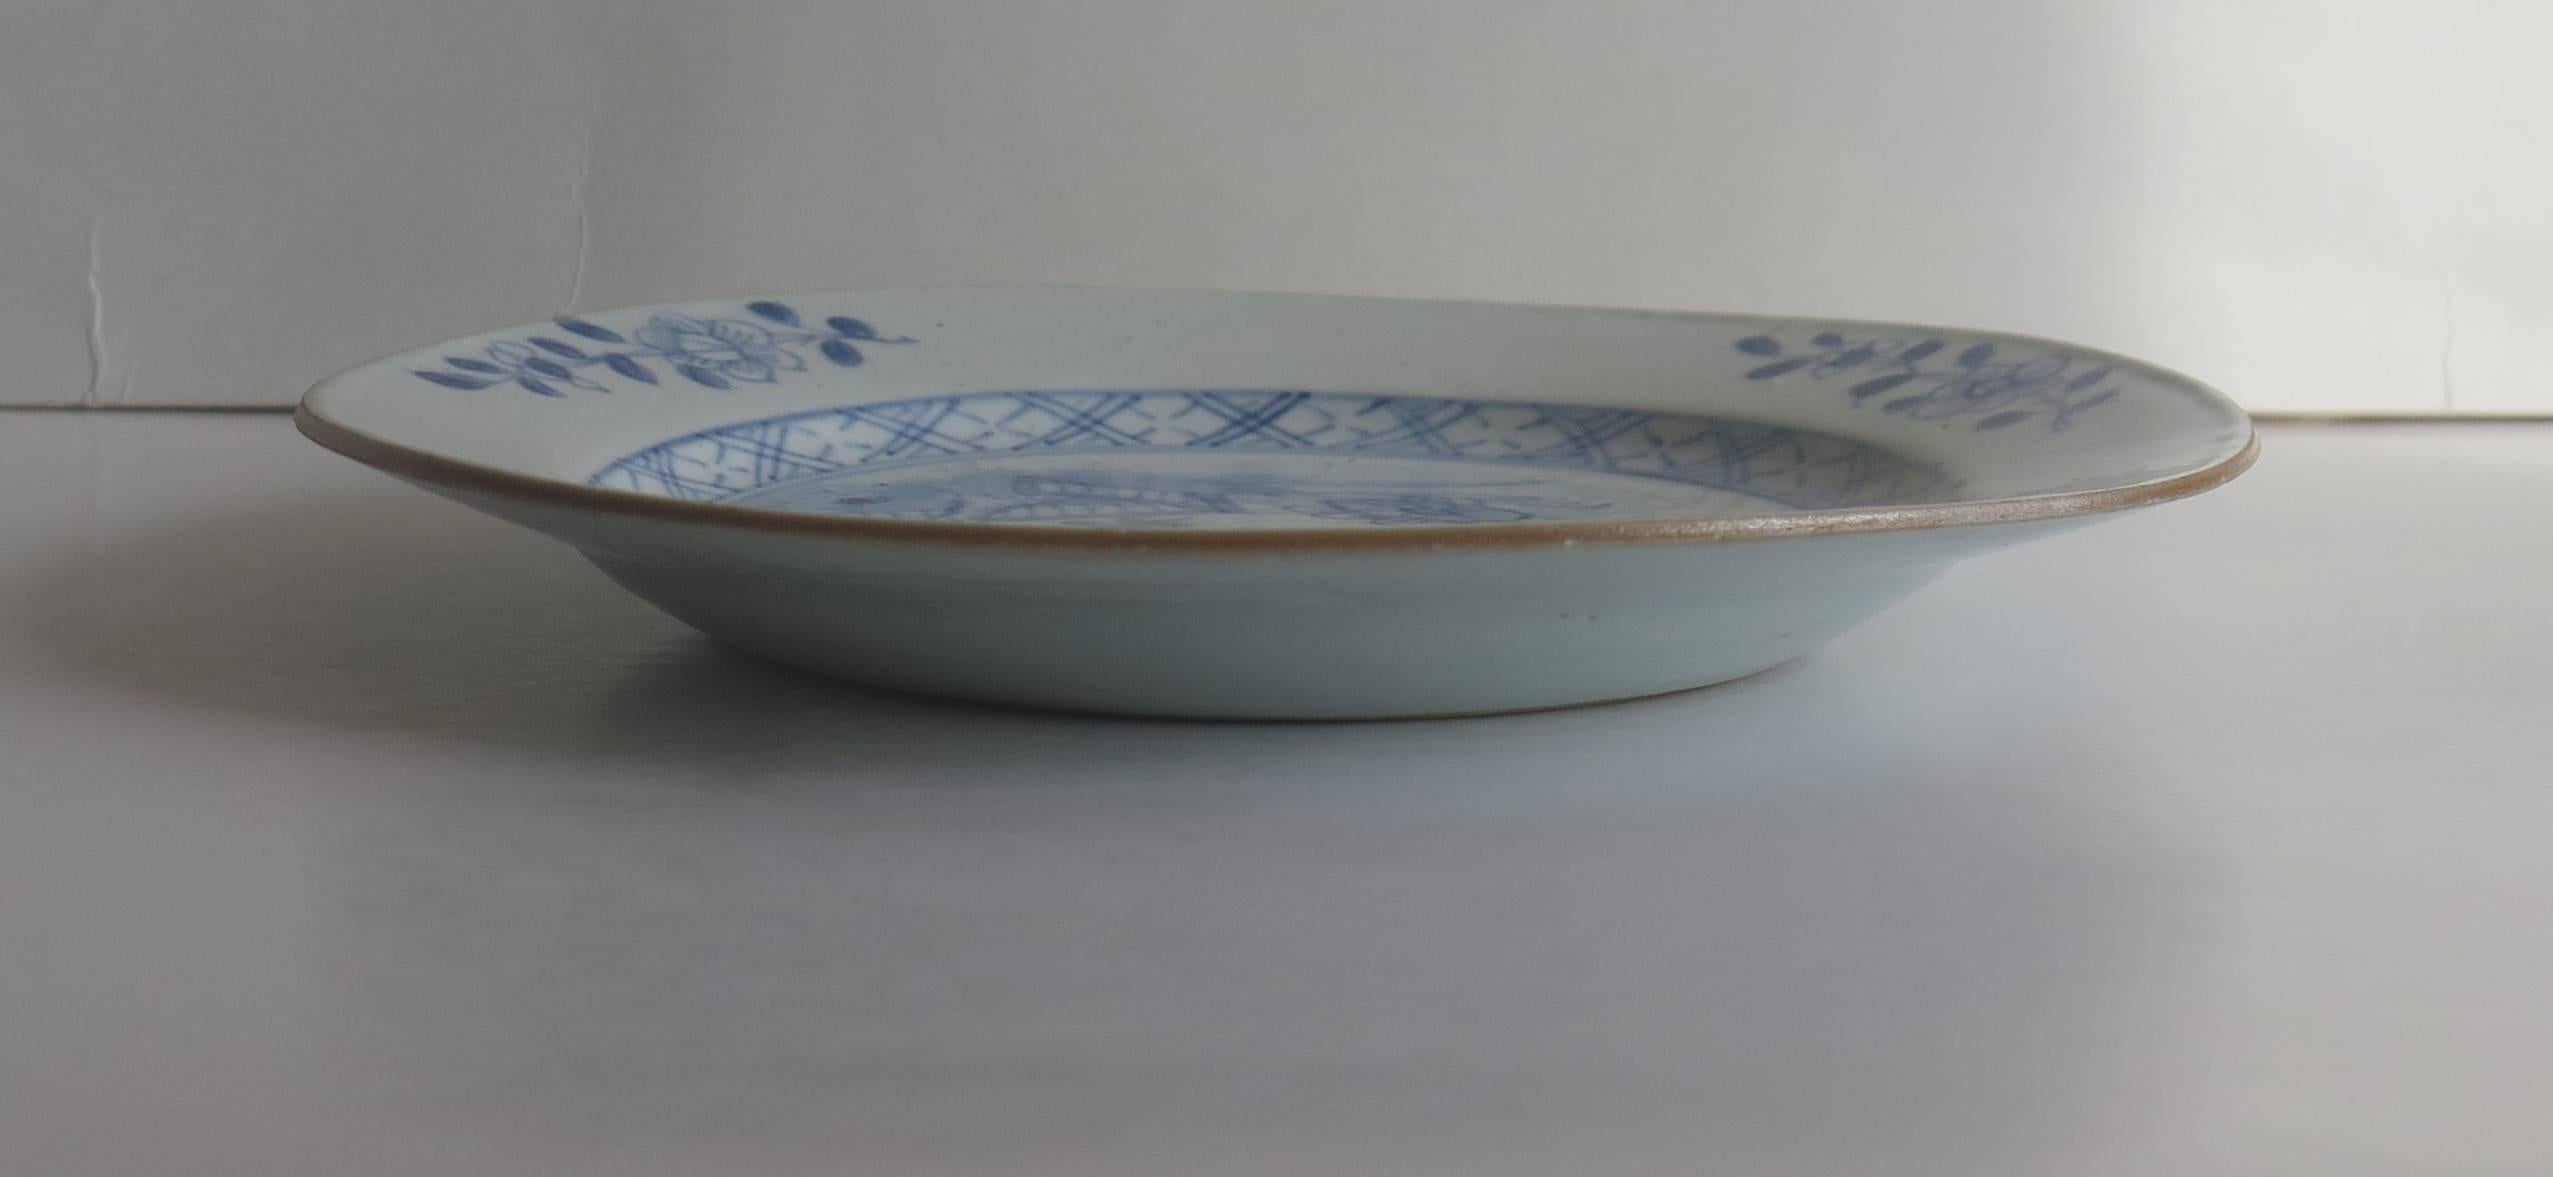 18th Century and Earlier 18th Century, Chinese Porcelain Side Plate, Blue and White, Hand-Painted